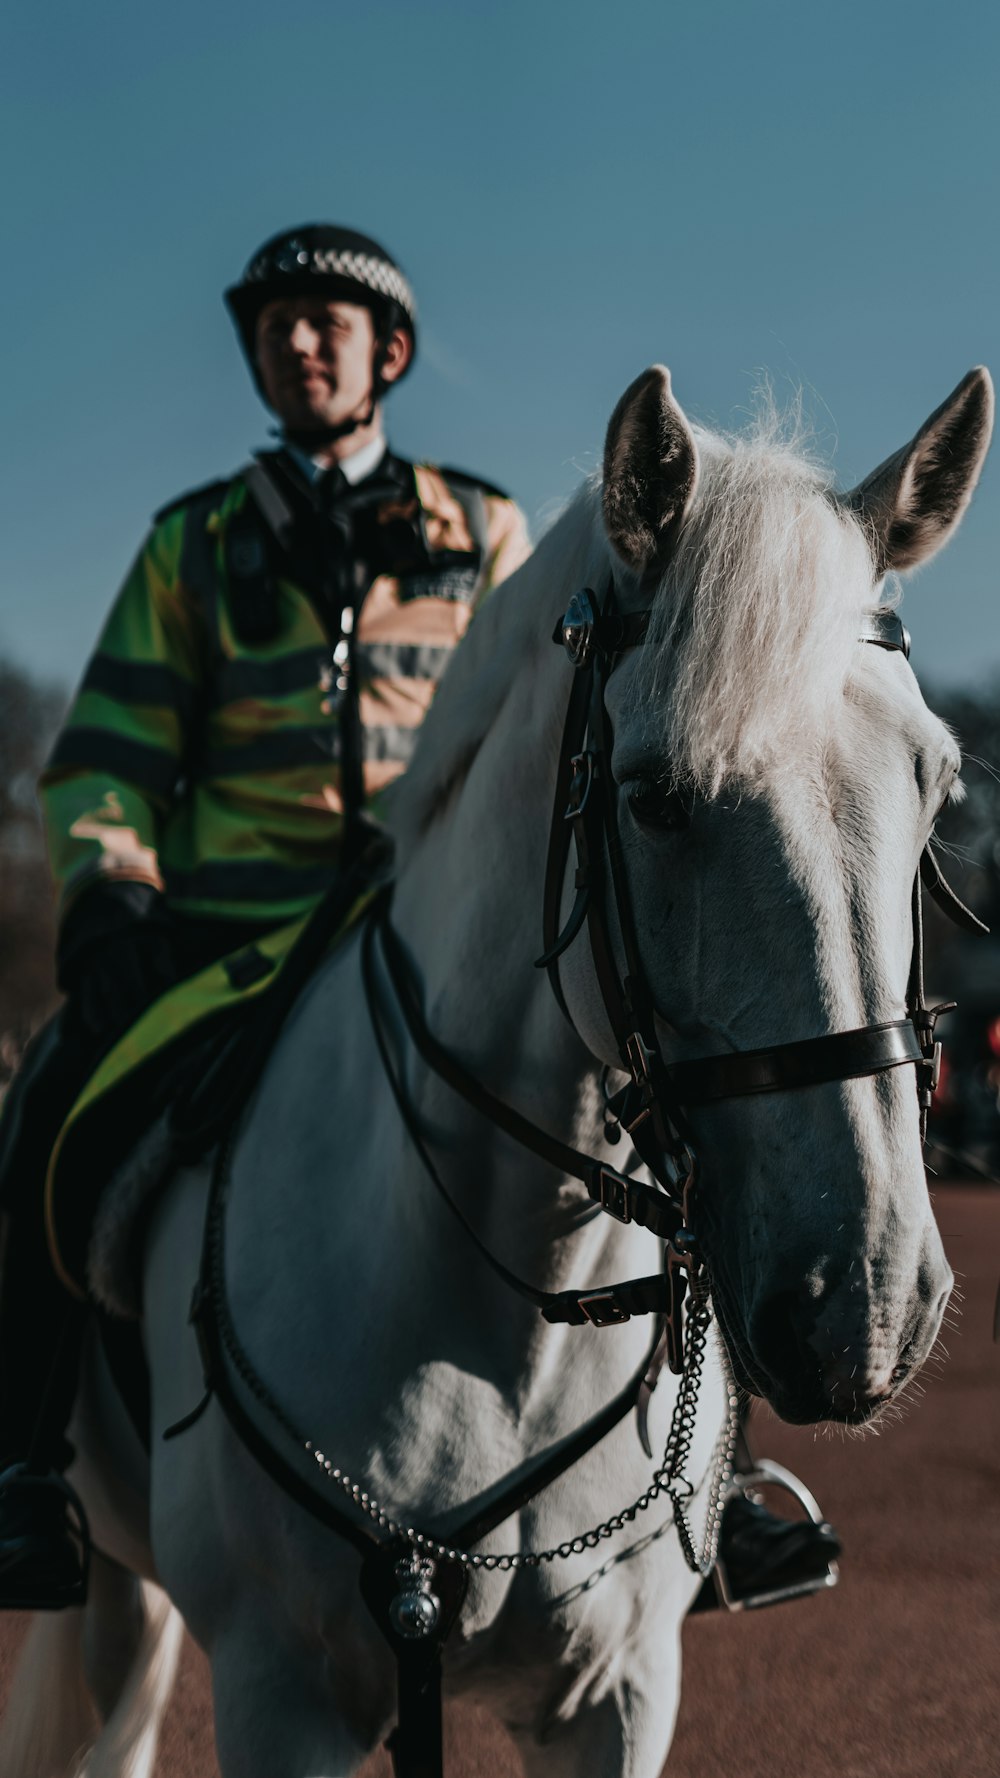 man in green and black striped long sleeve shirt riding white horse during daytime